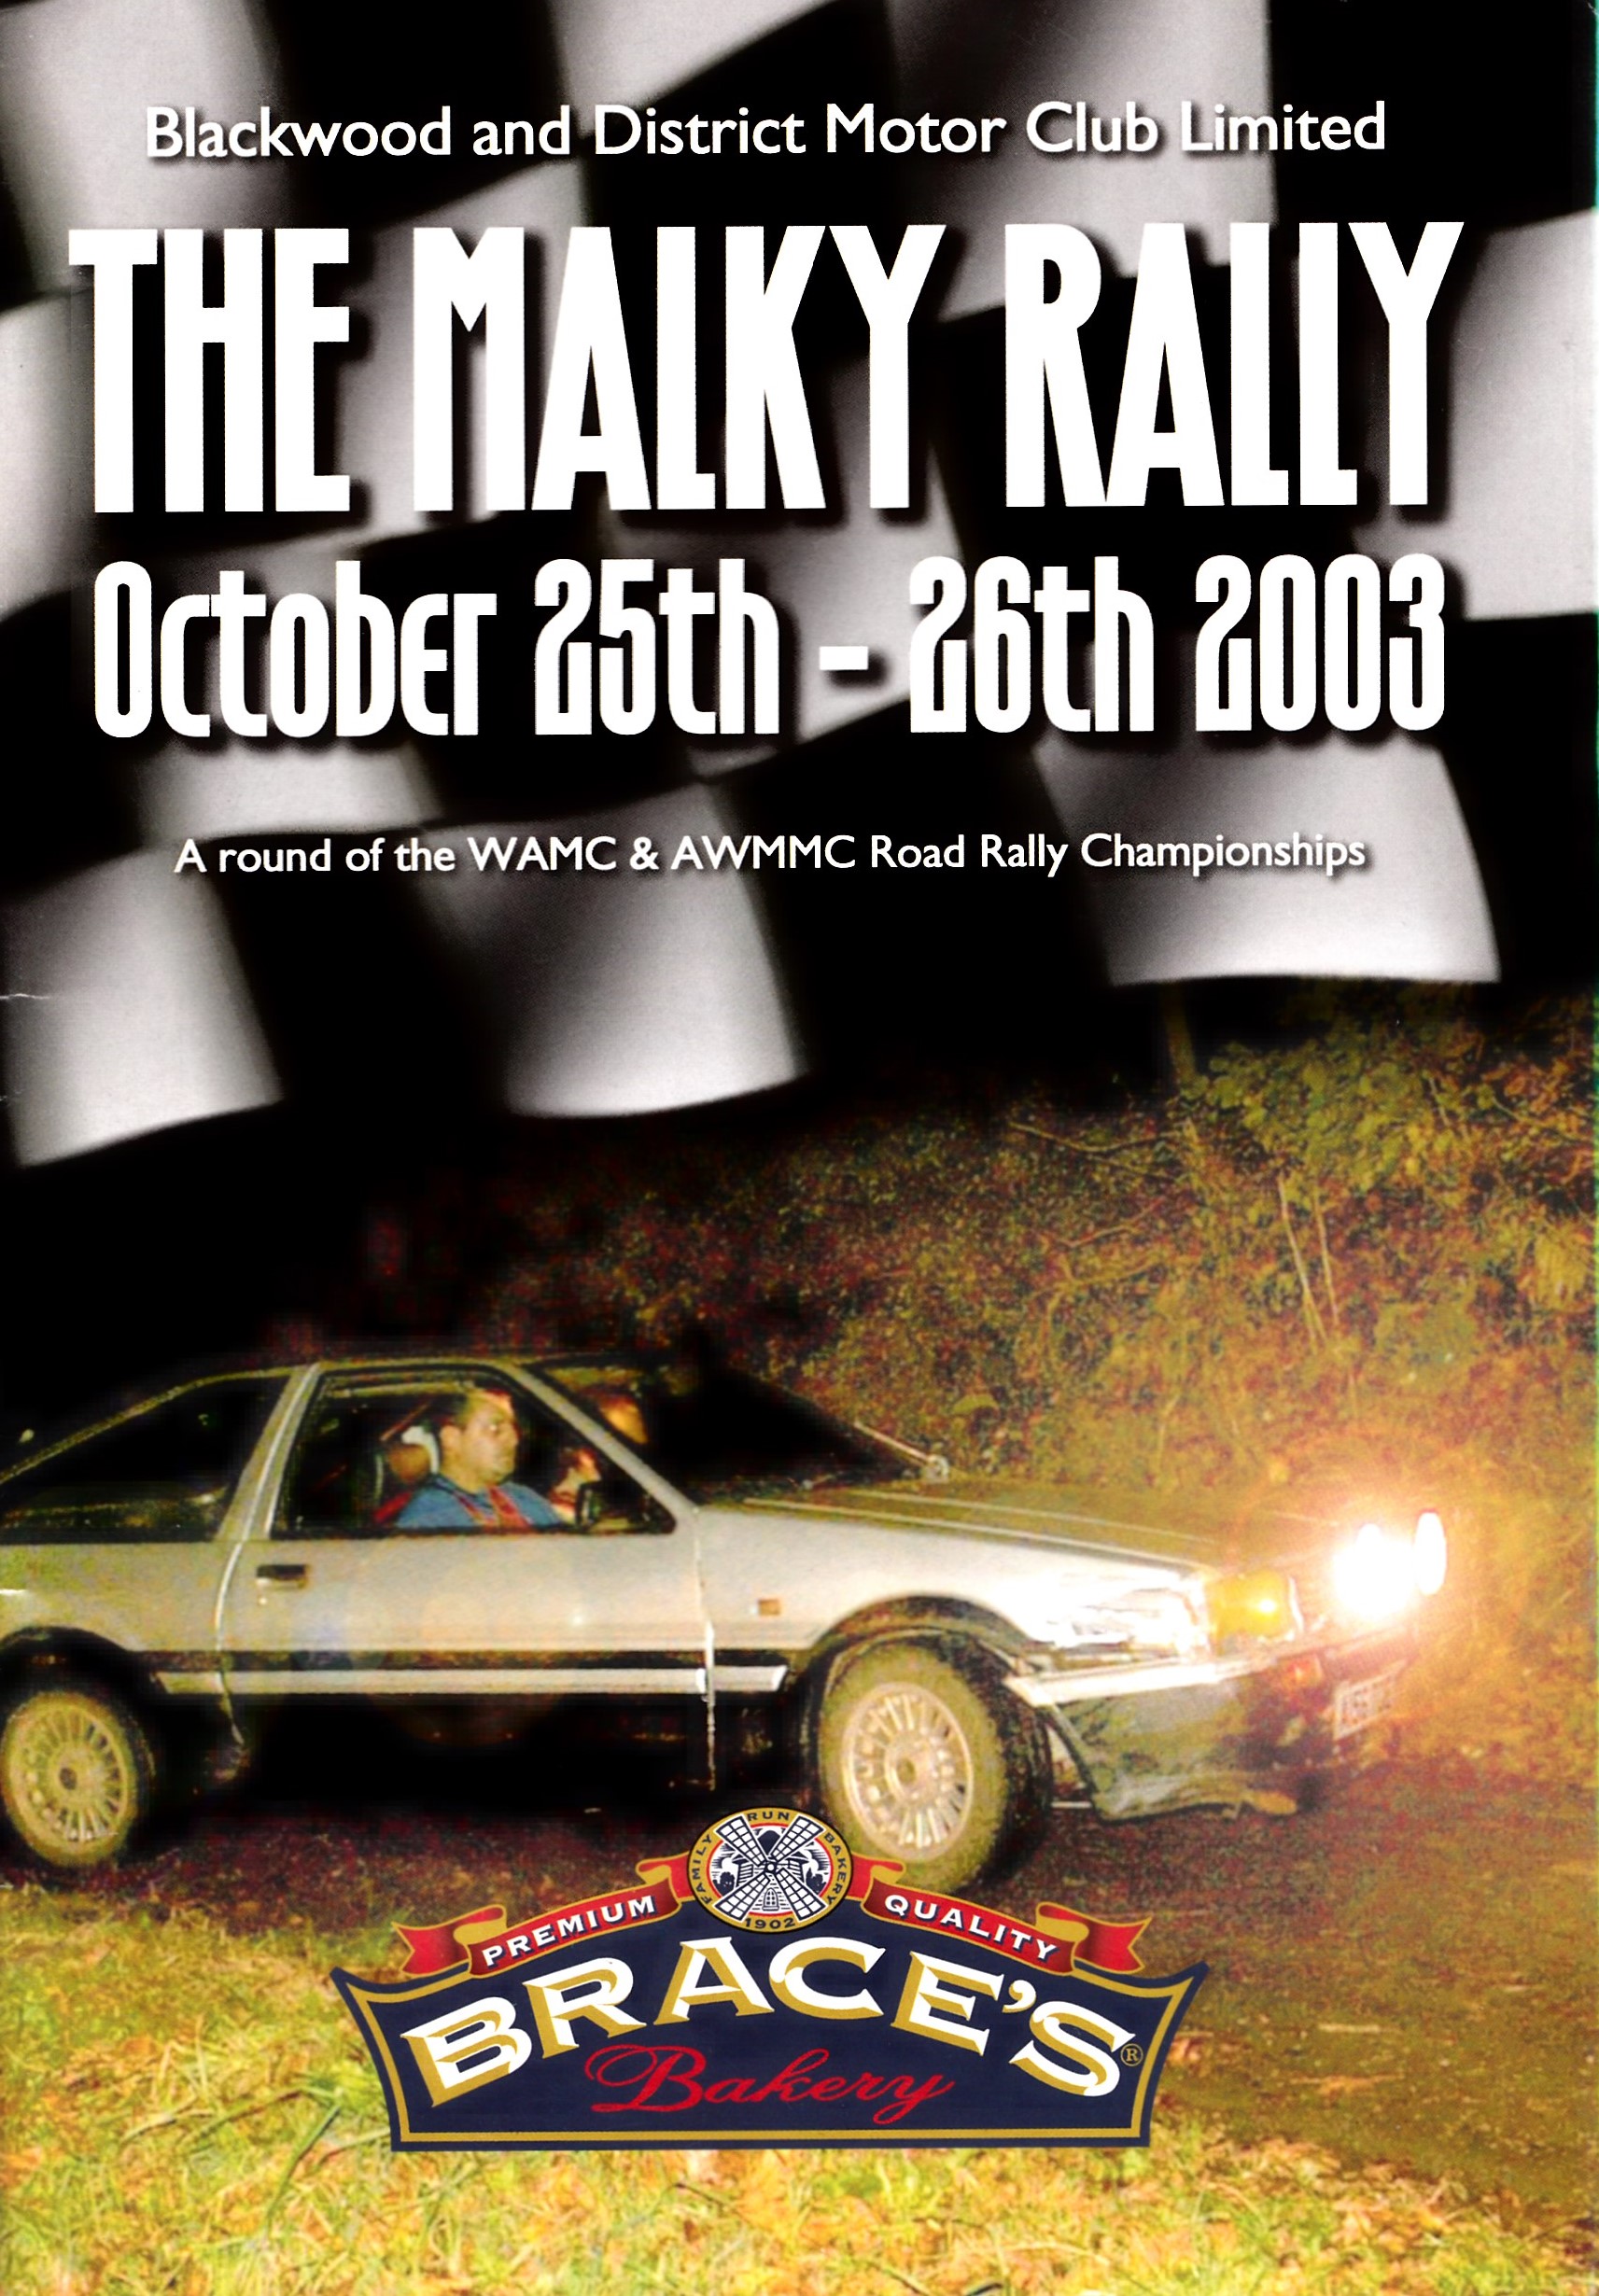 The Malky Rally 2003